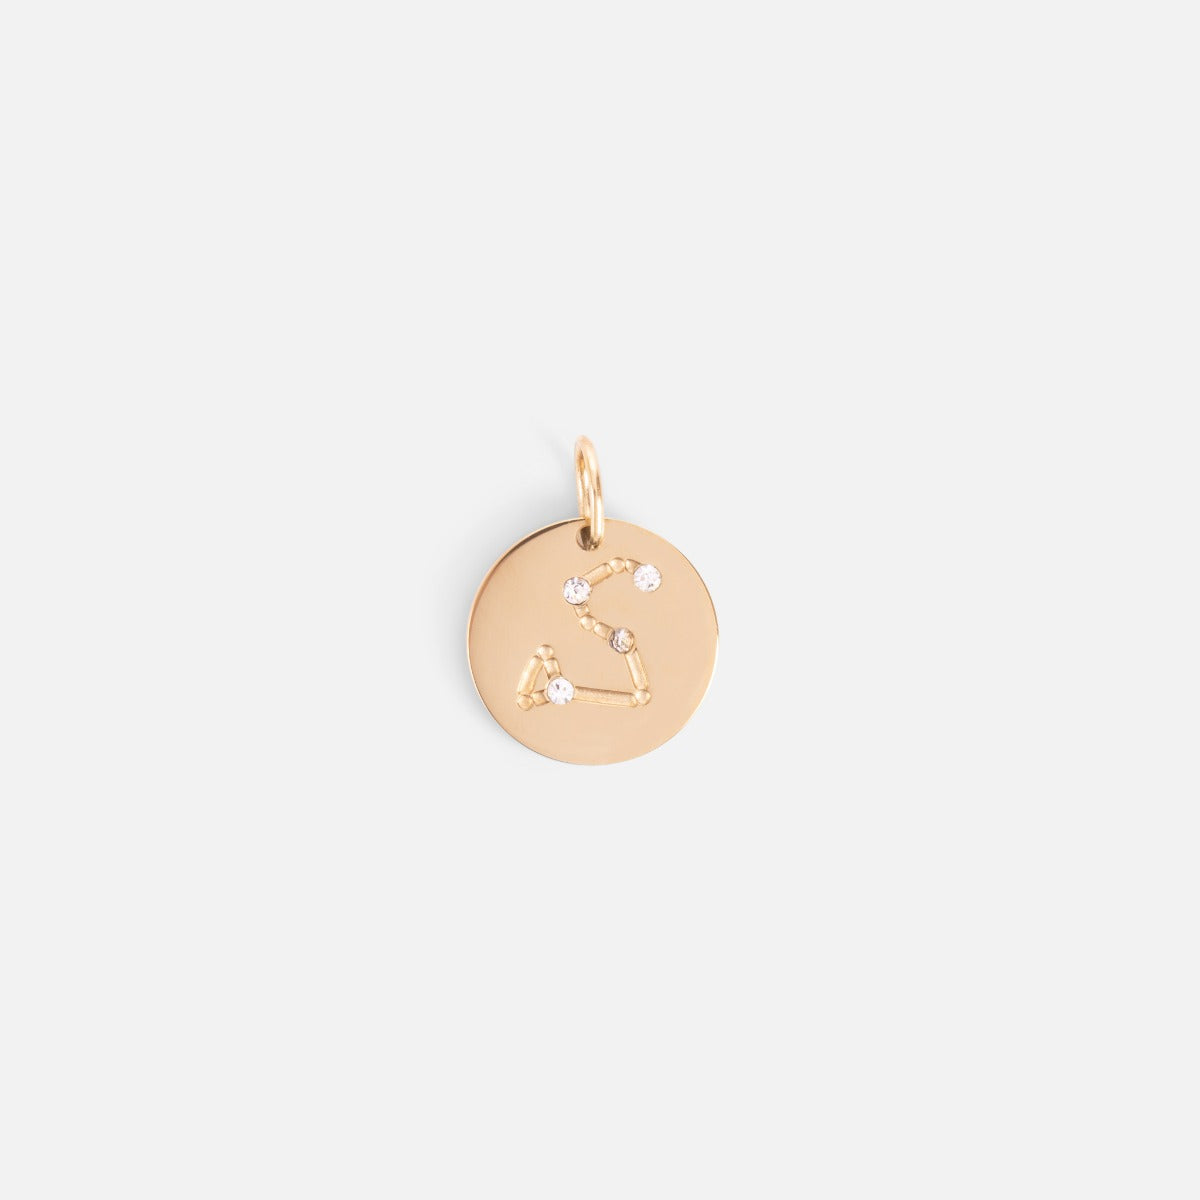 Small golden charm engraved with the zodiac constellation "leo"